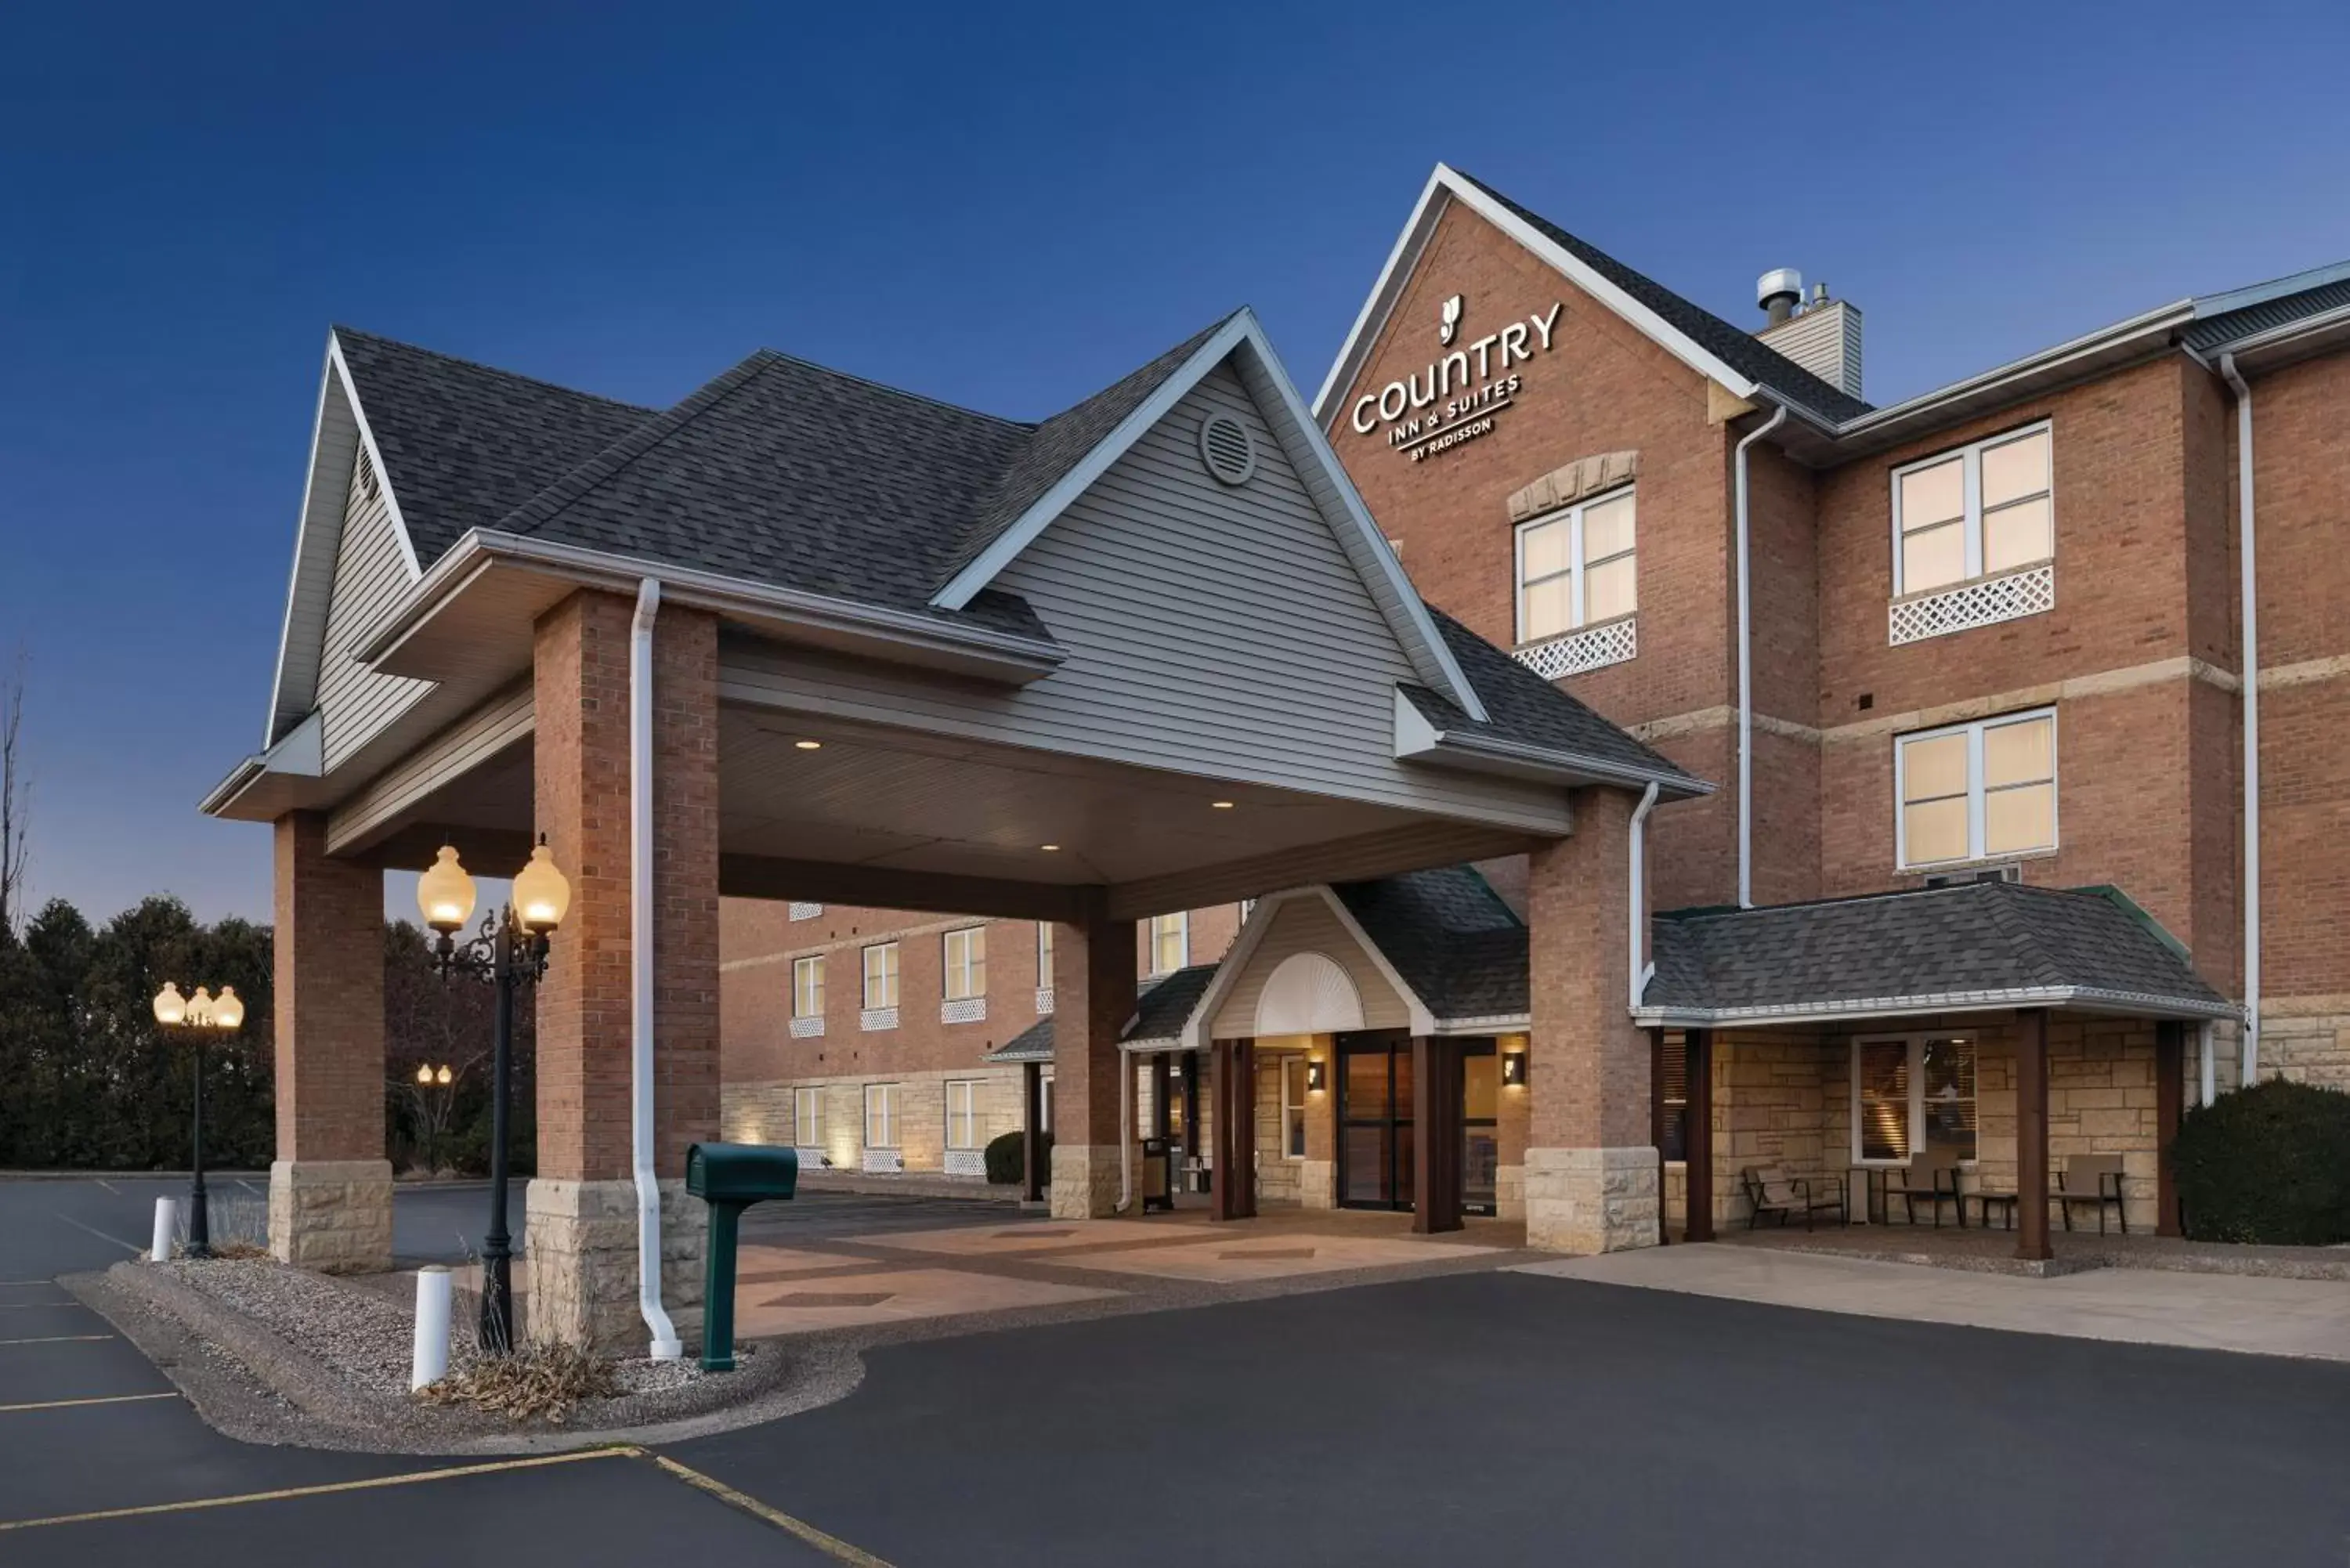 Property building in Country Inn & Suites by Radisson, Galena, IL